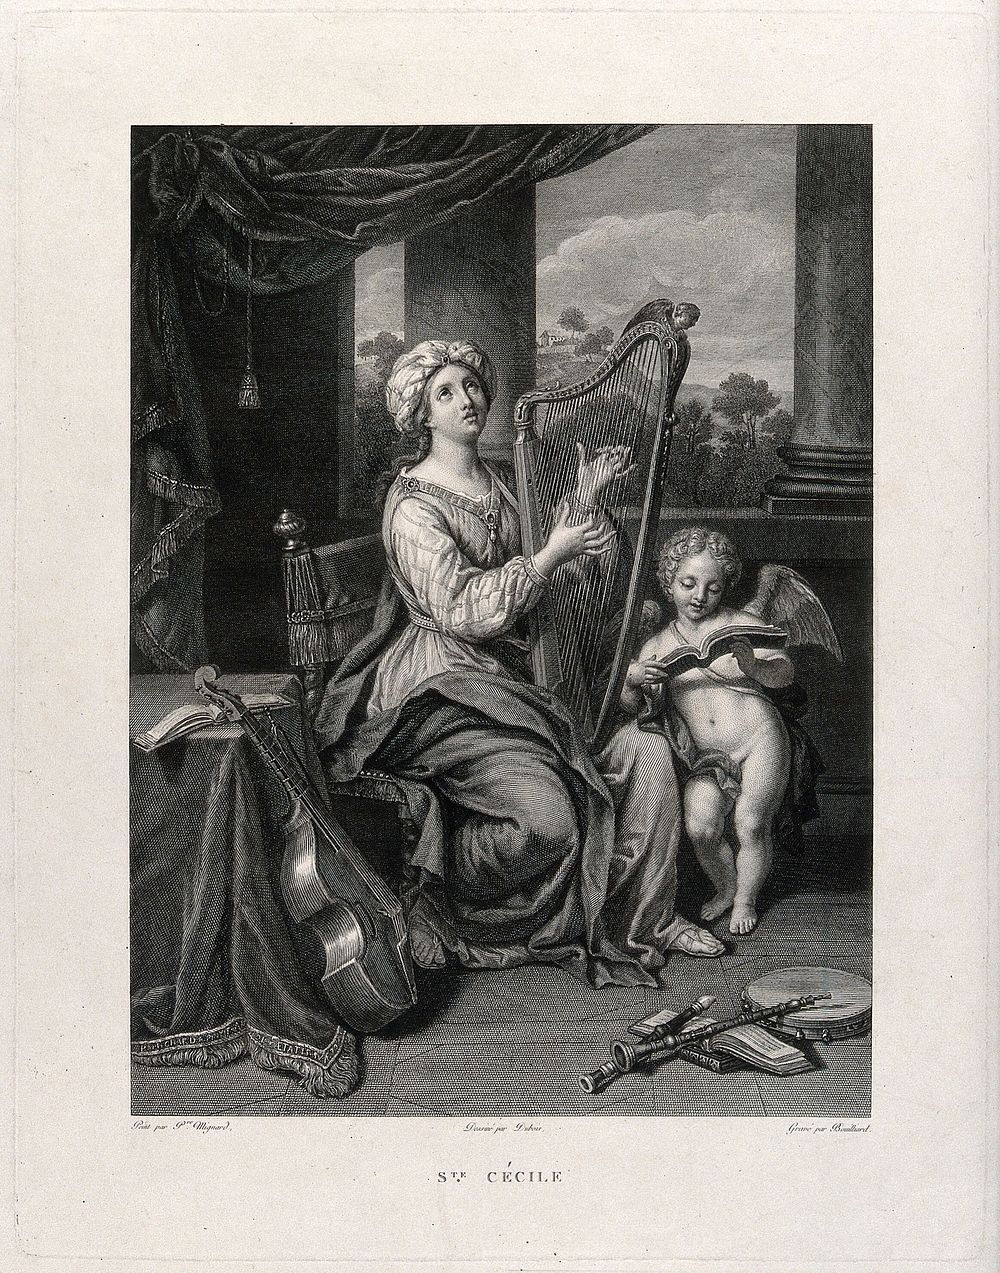 Saint Cecilia: she plays the harp, while an angel sings. Engraving by J. Bouillard, 1804, after Dubois after P. Mignard…